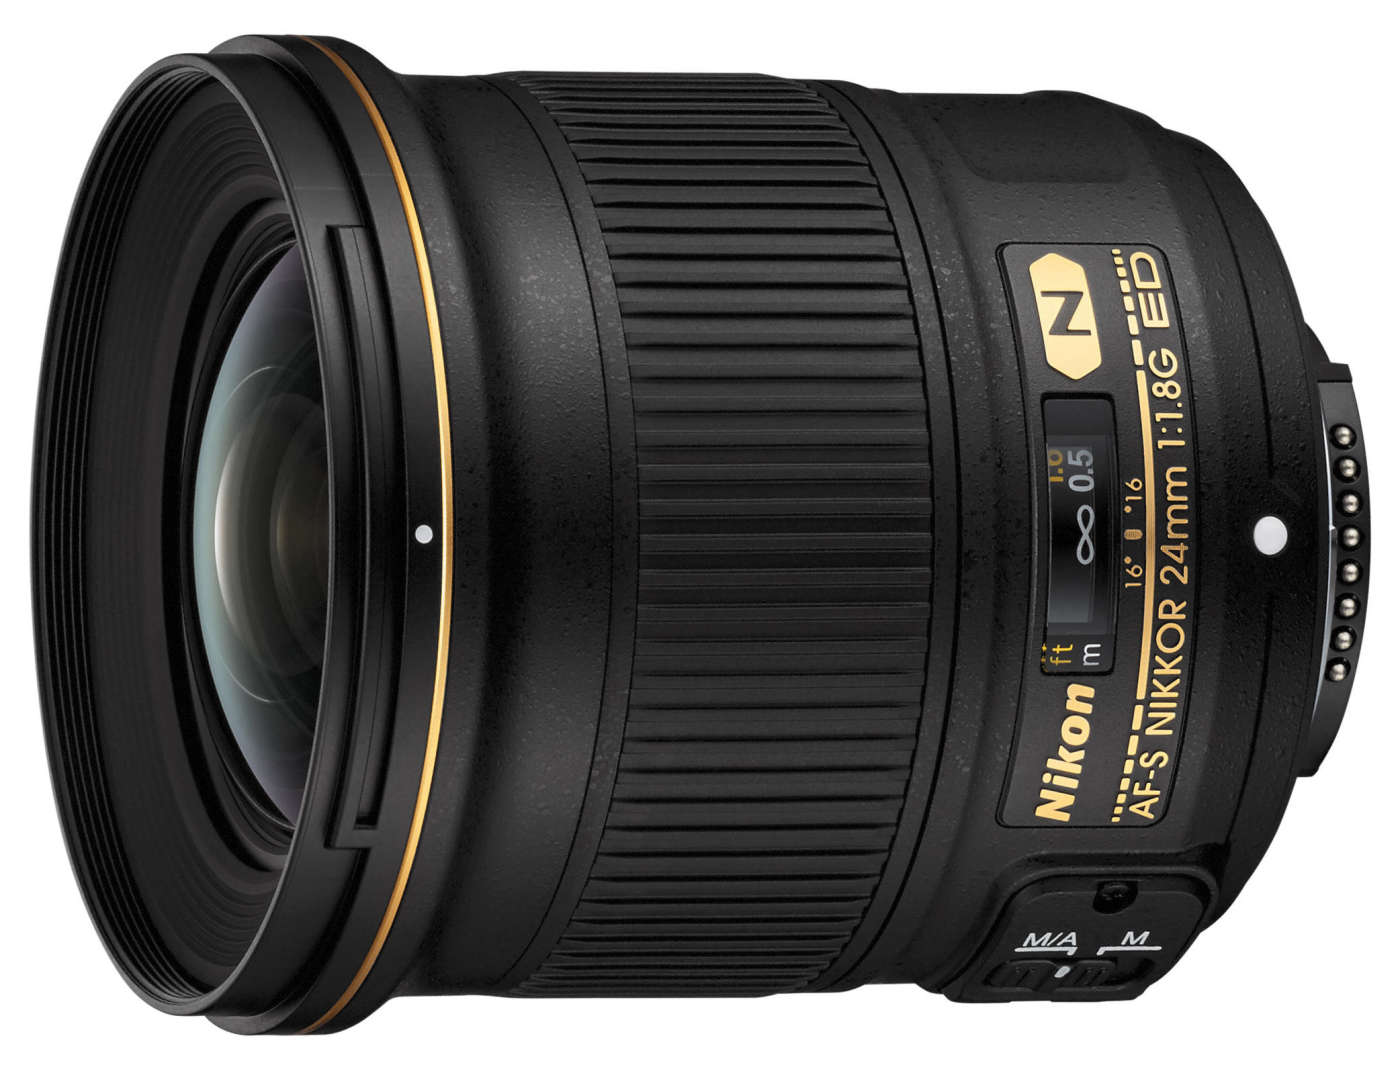 Knowing what the best lenses for Nikon full frame cameras are